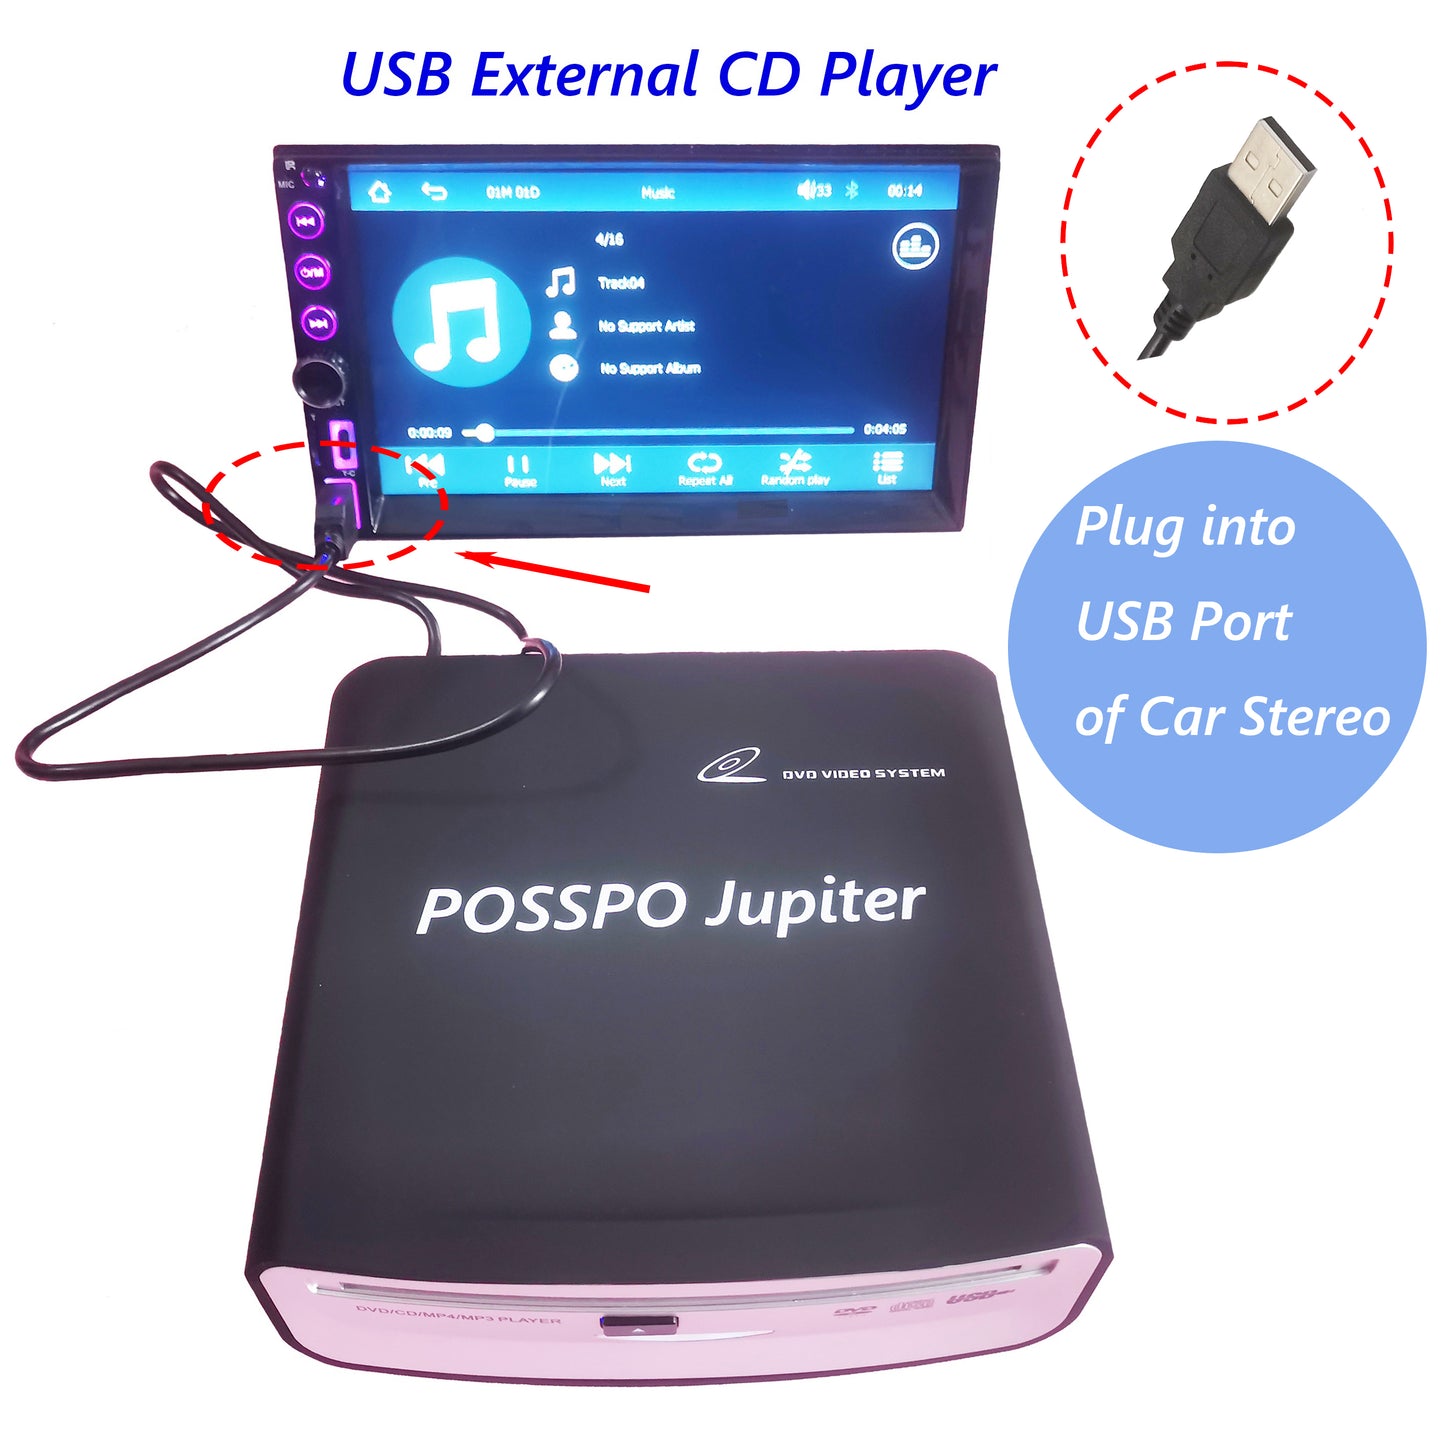 POSSPO Jupiter CD DVD Player for Car with USB Port, Portable External CD Player That Plugs into Car Laptop Desktop TV Mac Computer, Plug & Play –Upgraded with Extra USB Extension Cable